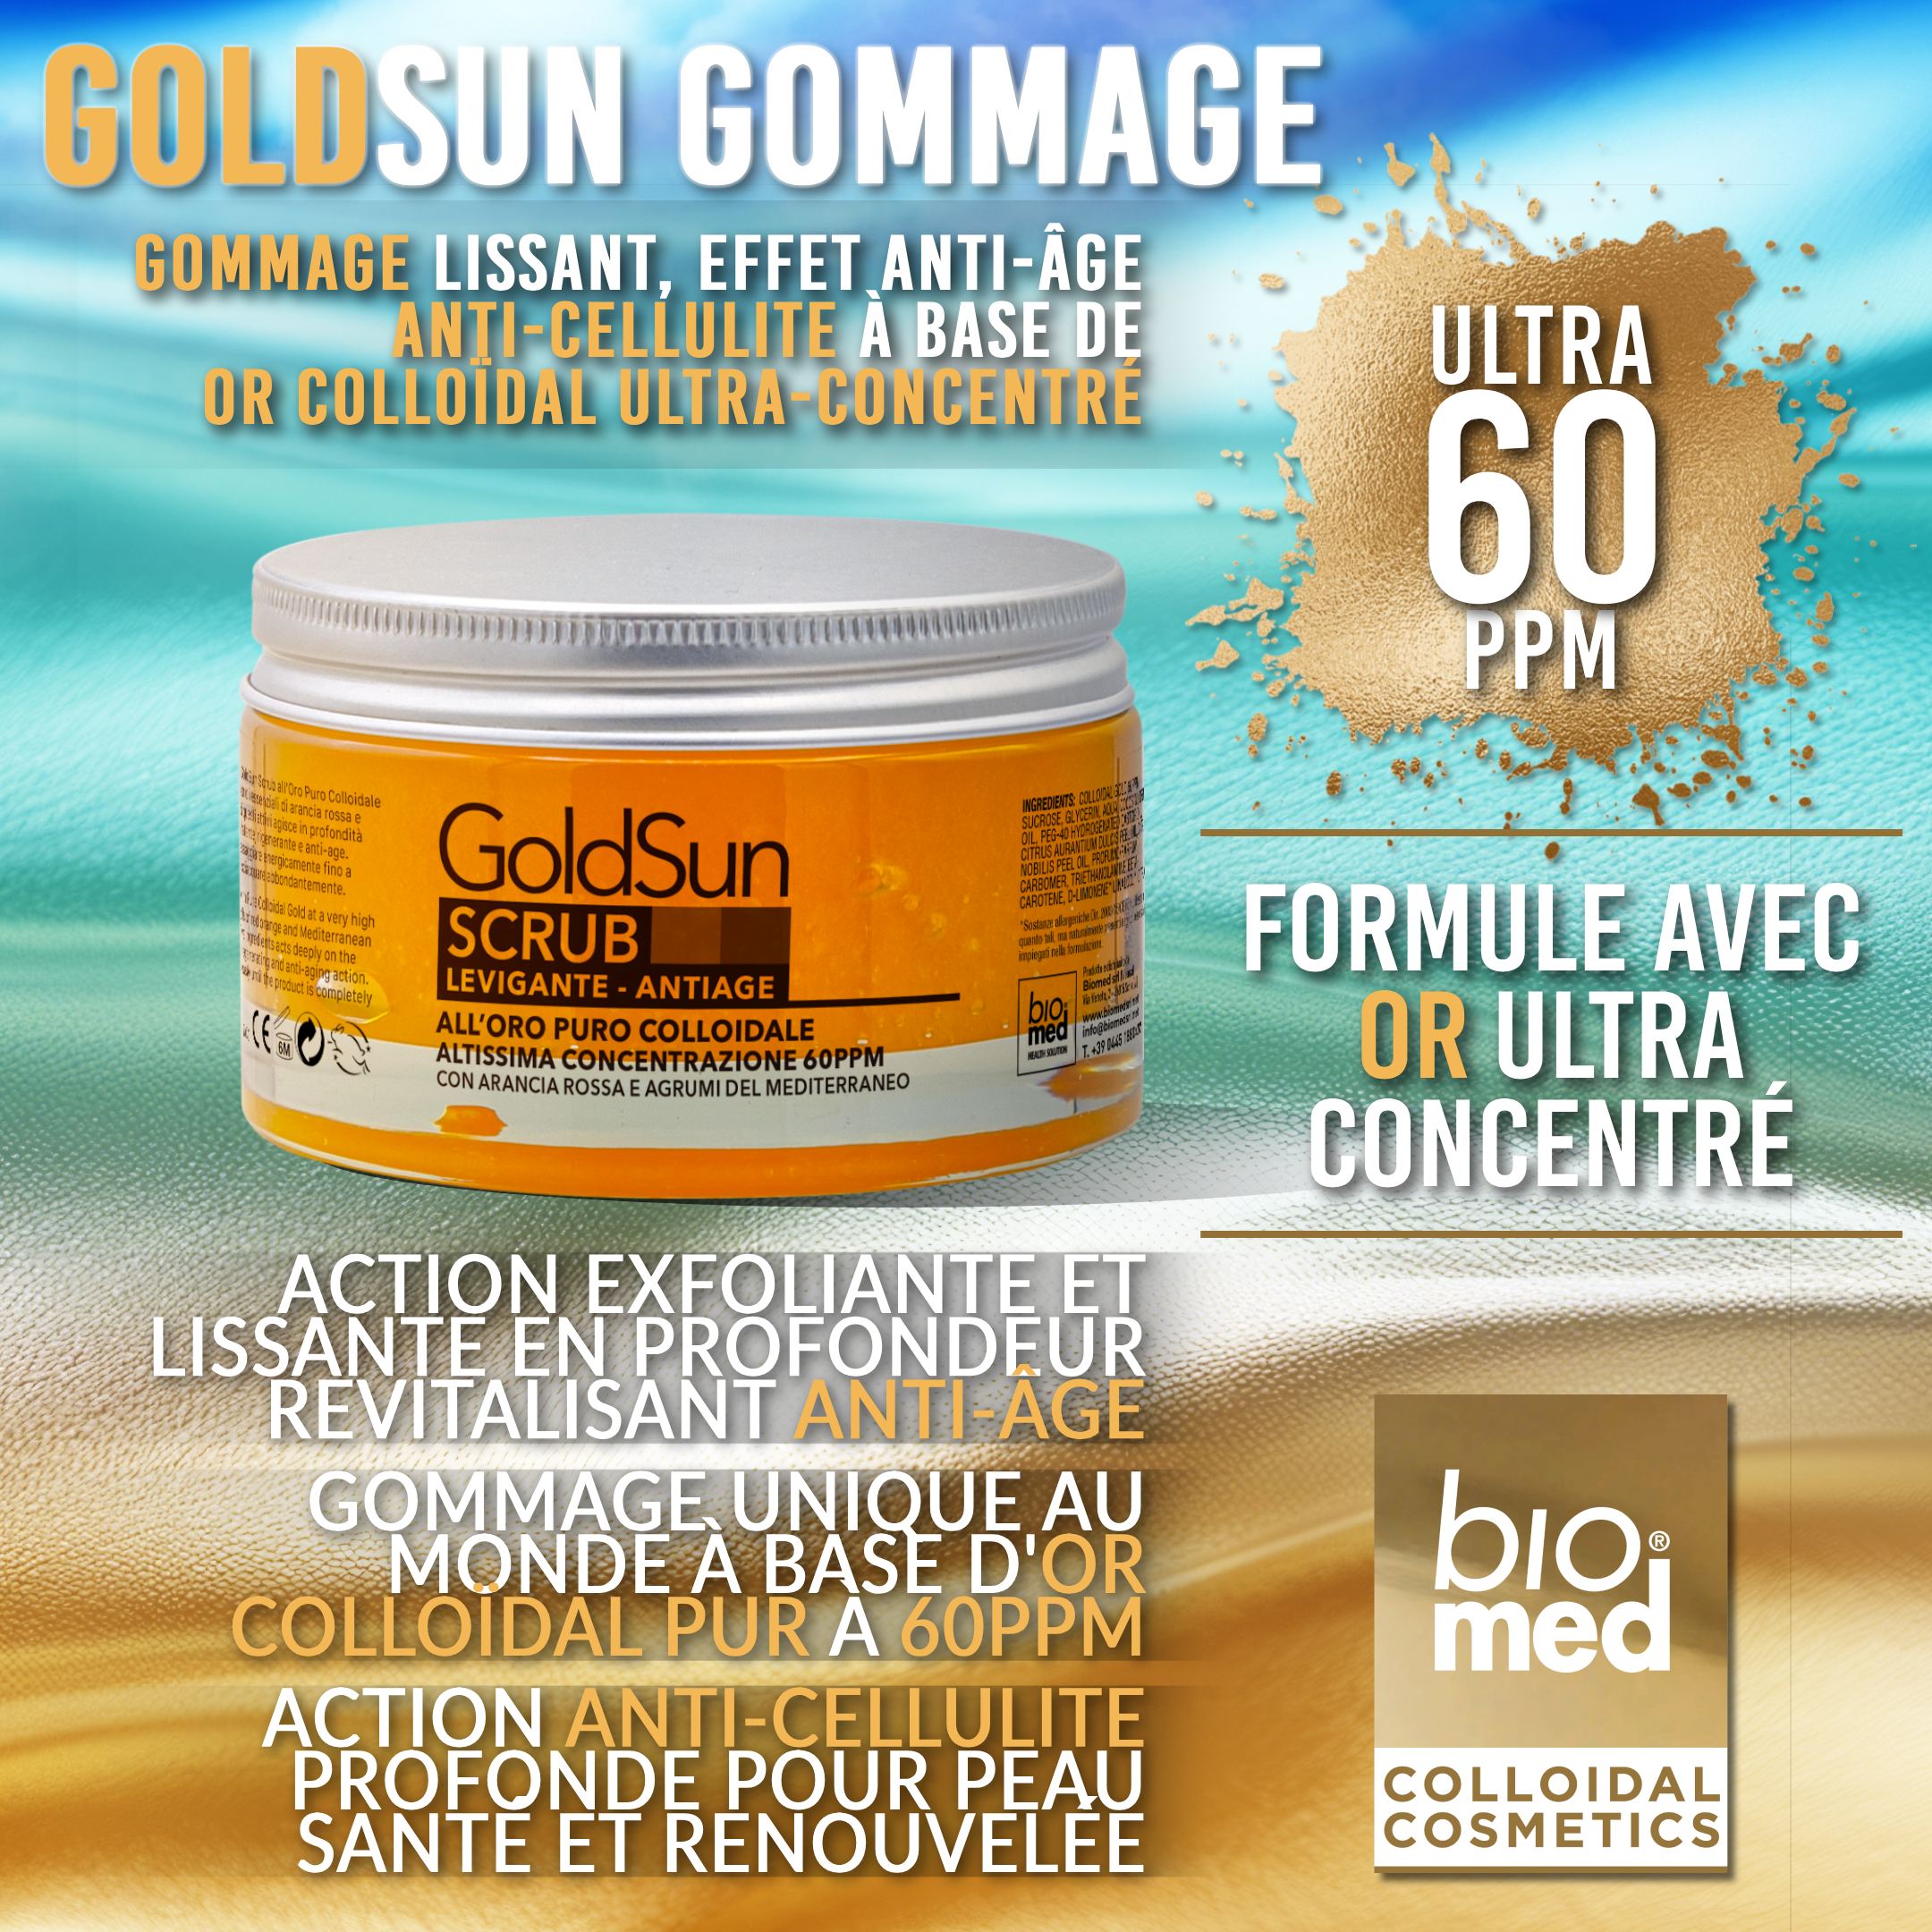 GOLDSUN GOMMAGE LISSANT BIOMED - ANTICELLULITE, ANTI-ÂGE 200ML